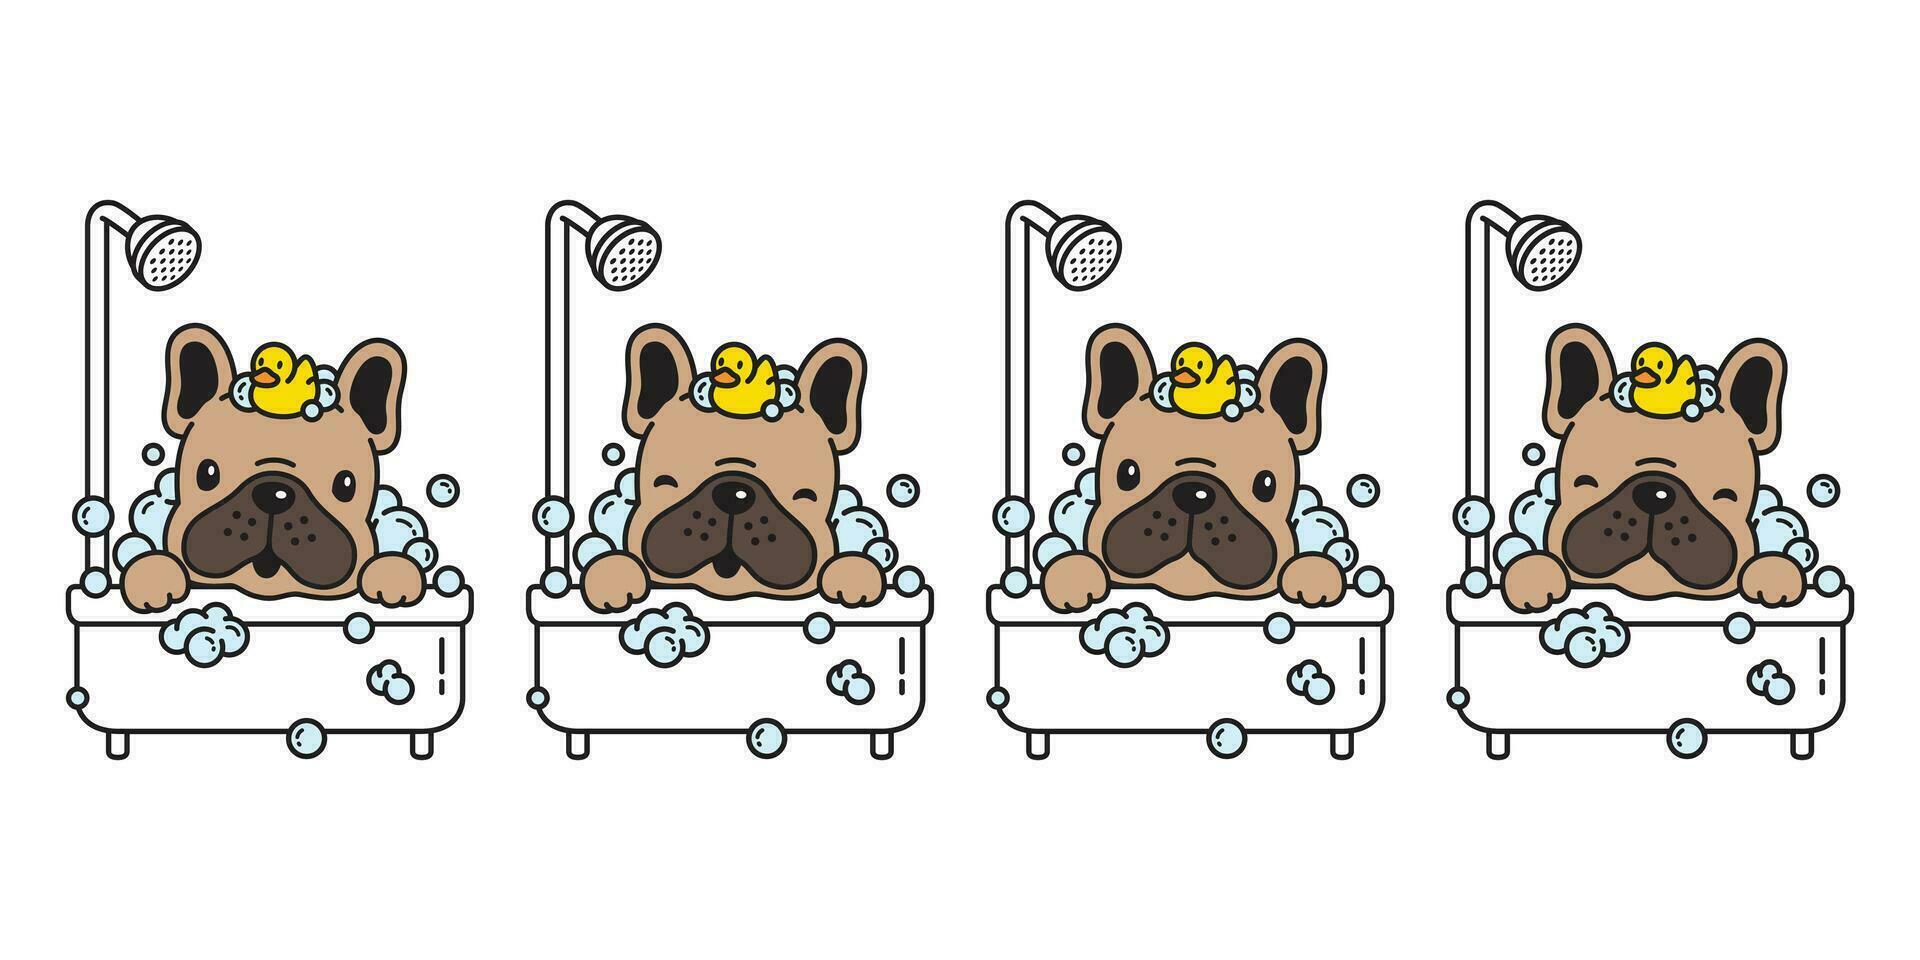 dog vector french bulldog bath shower rubber duck cartoon character icon logo bubble soap illustration doodle brown